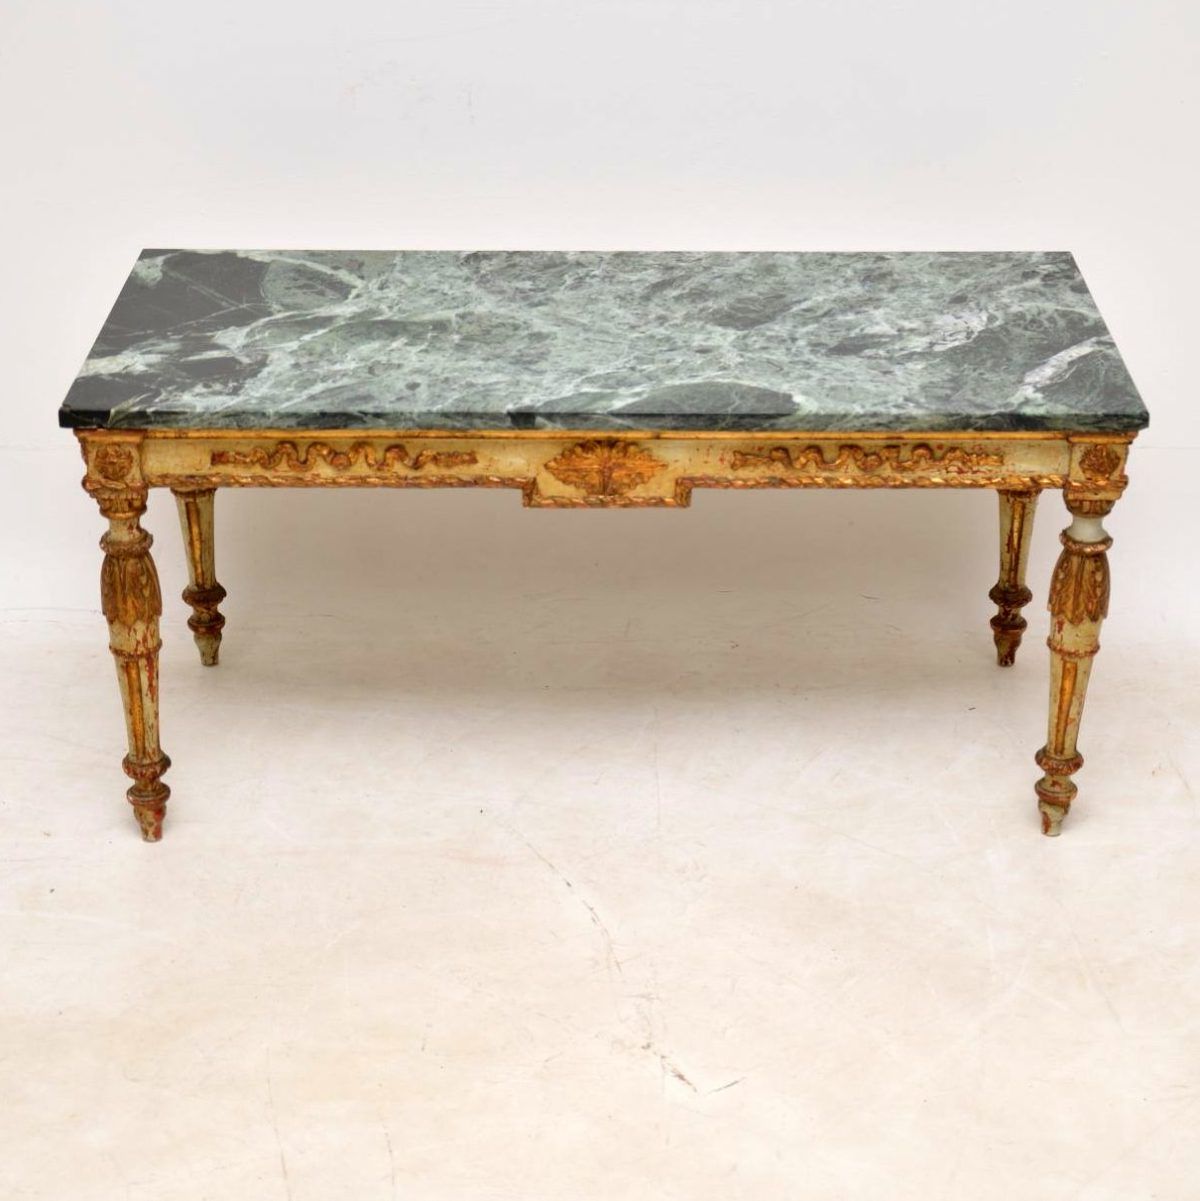 Antique French Marble Top Coffee Table – Marylebone Antiques Pertaining To Popular Marble Top Coffee Tables (View 20 of 20)